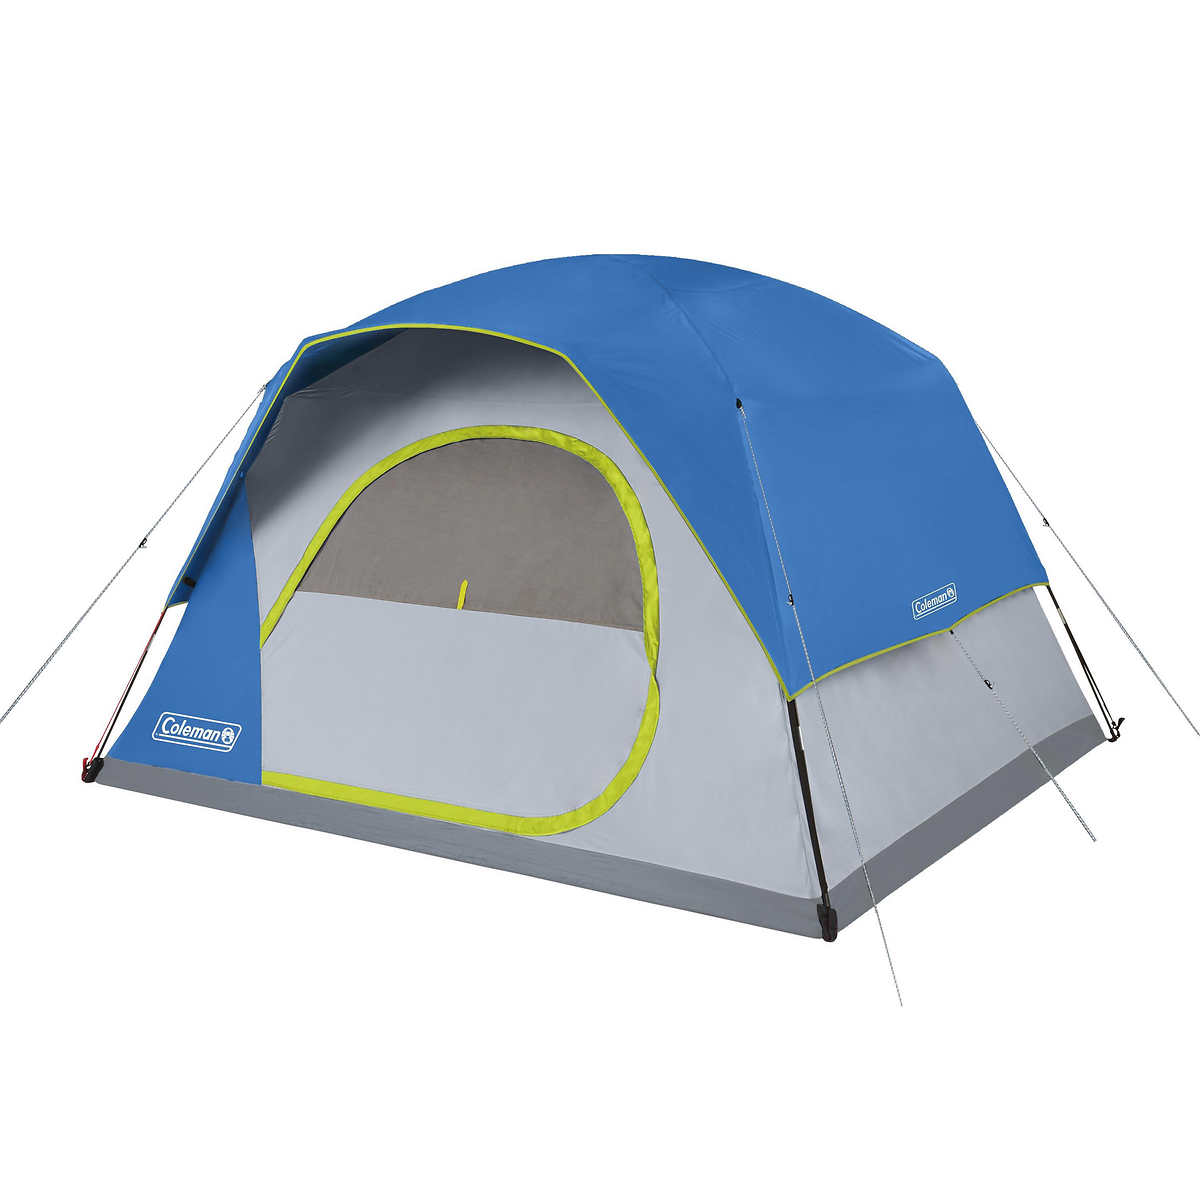 Coleman 6-Person Skydome Tent with Lighting | Costco